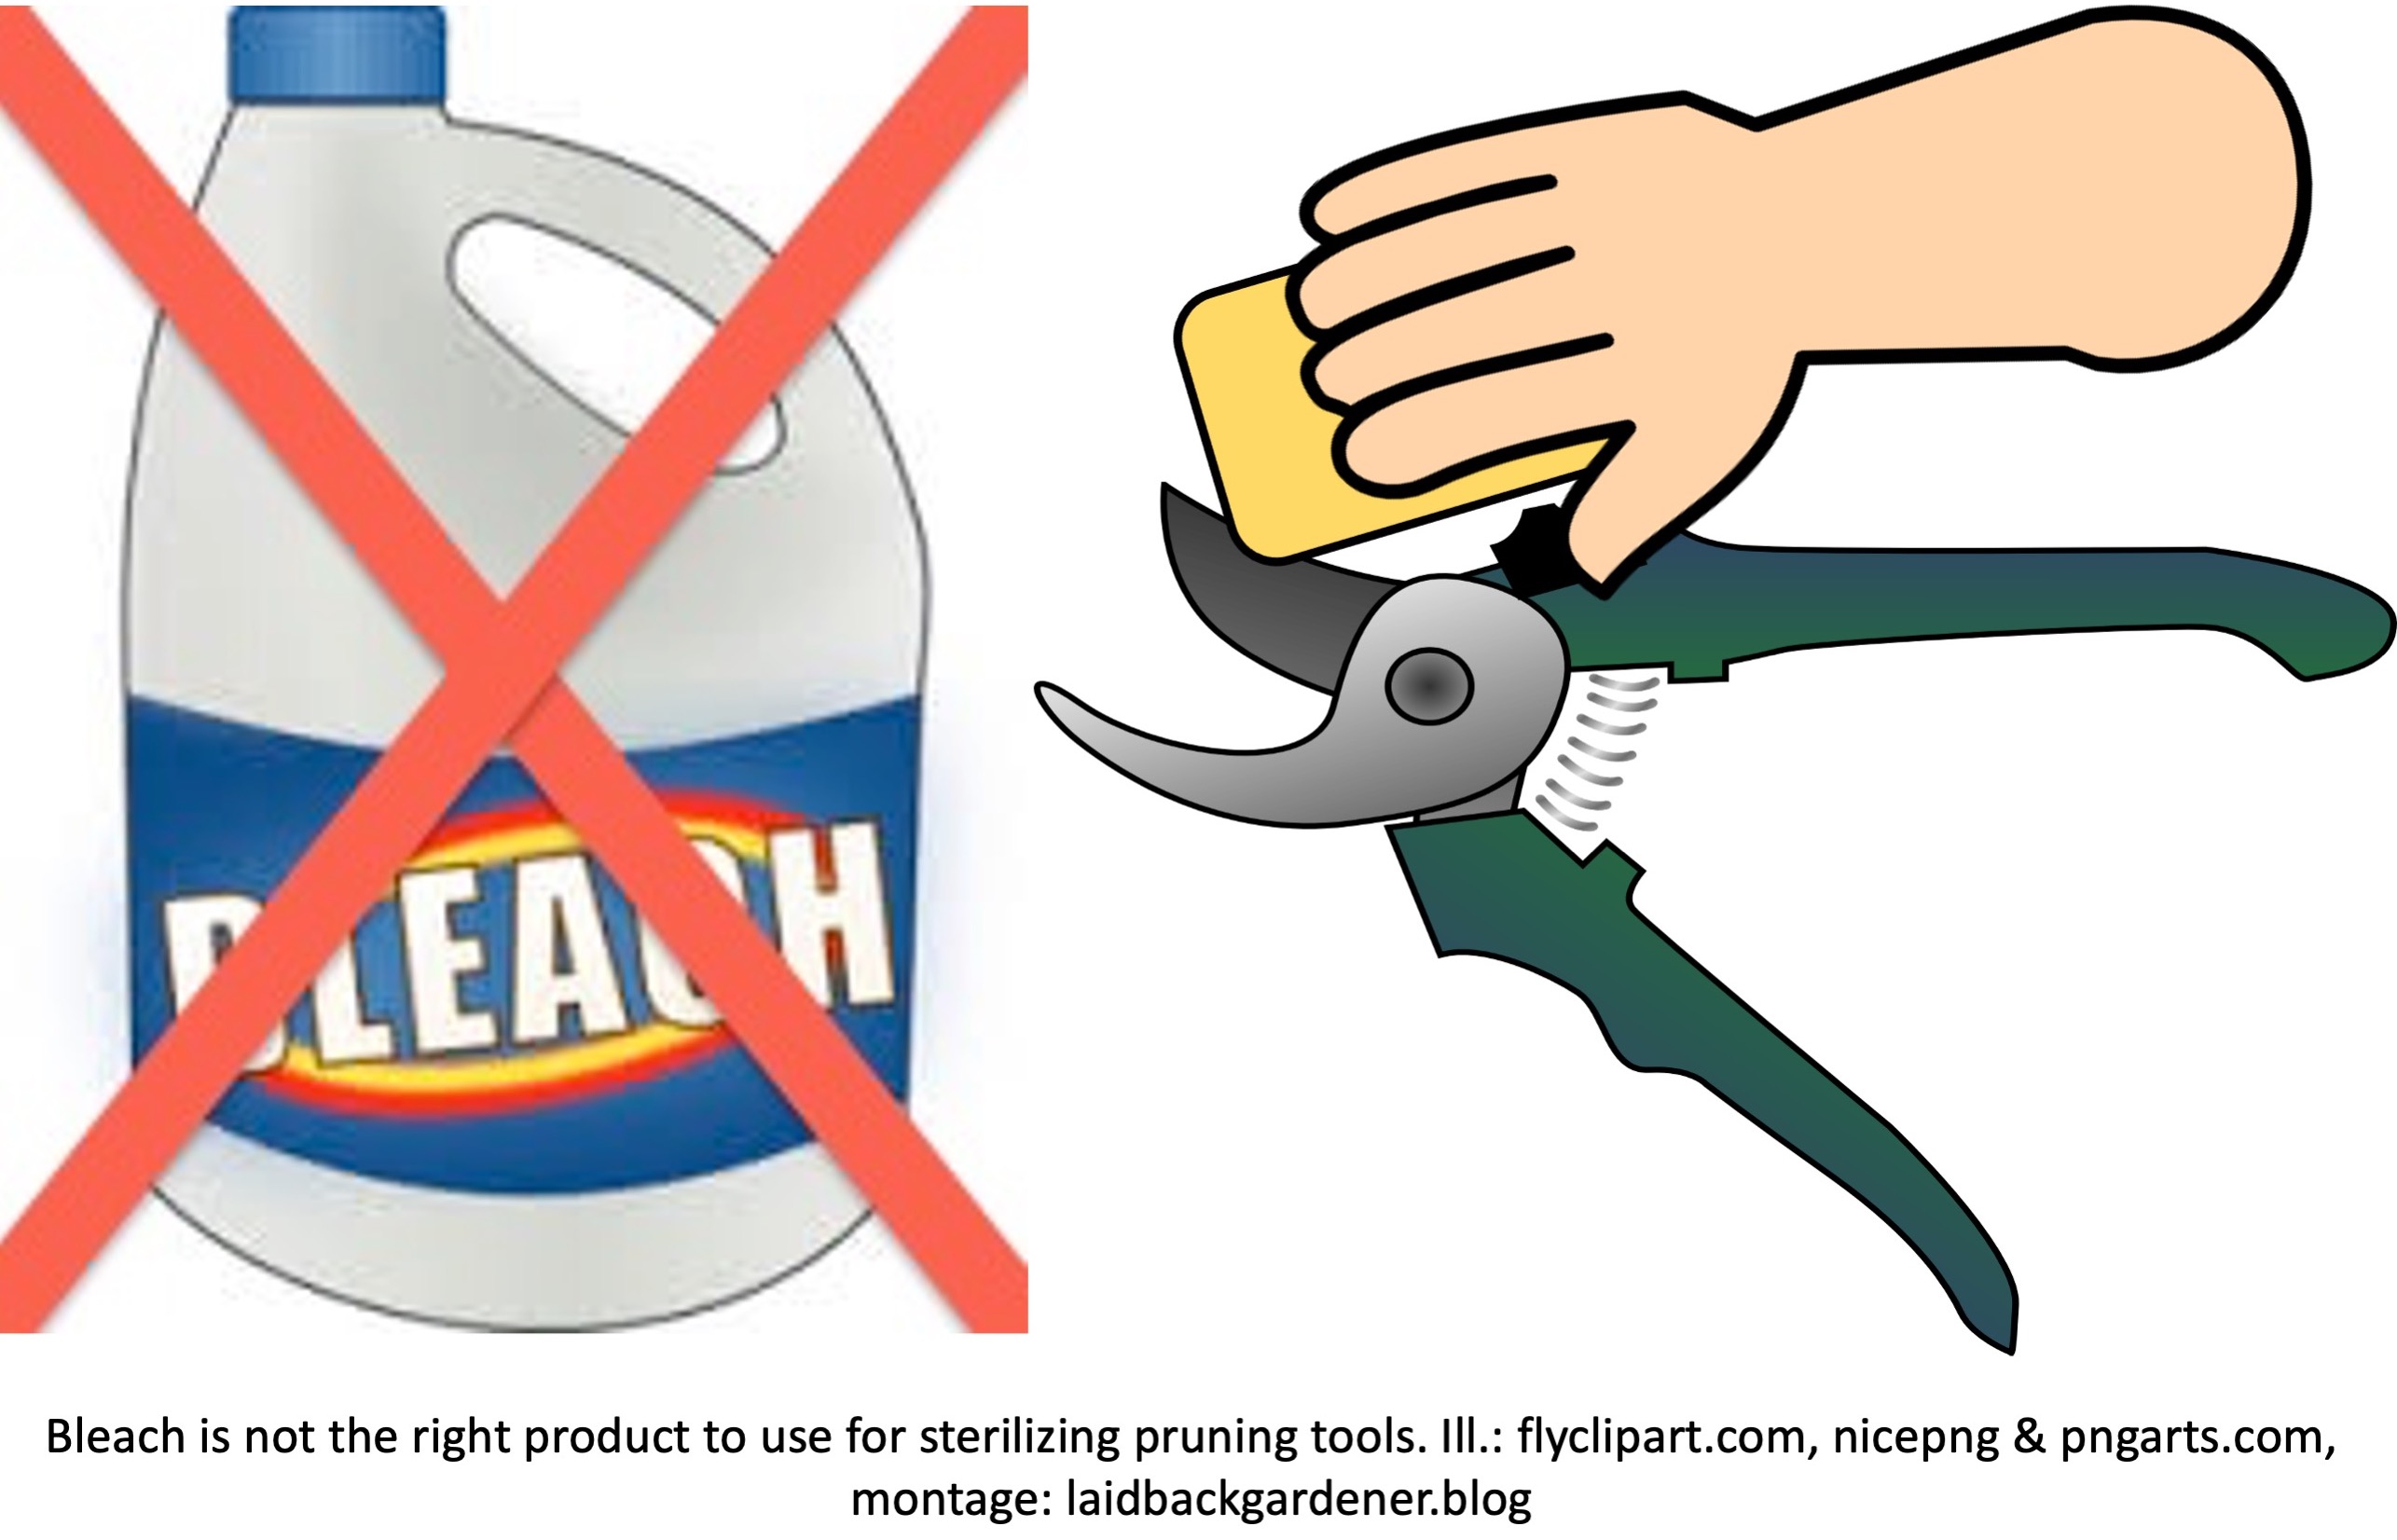 A bottle of bleach and a hand cleaning pruning shears.